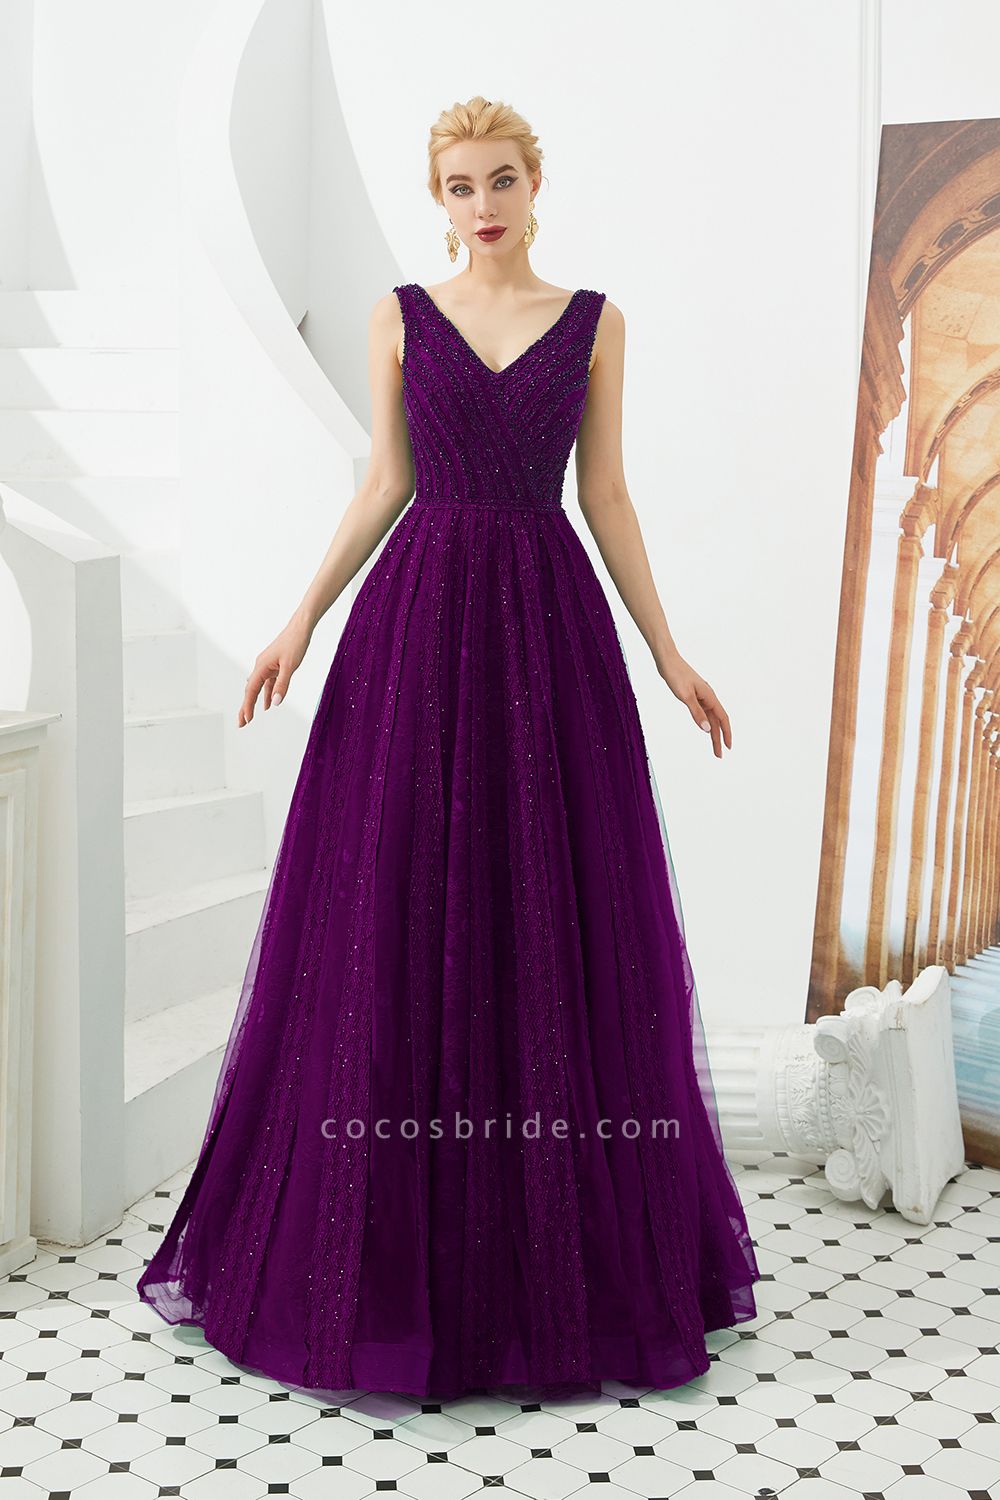 Awesome V-neck Tulle A-line Prom Dress